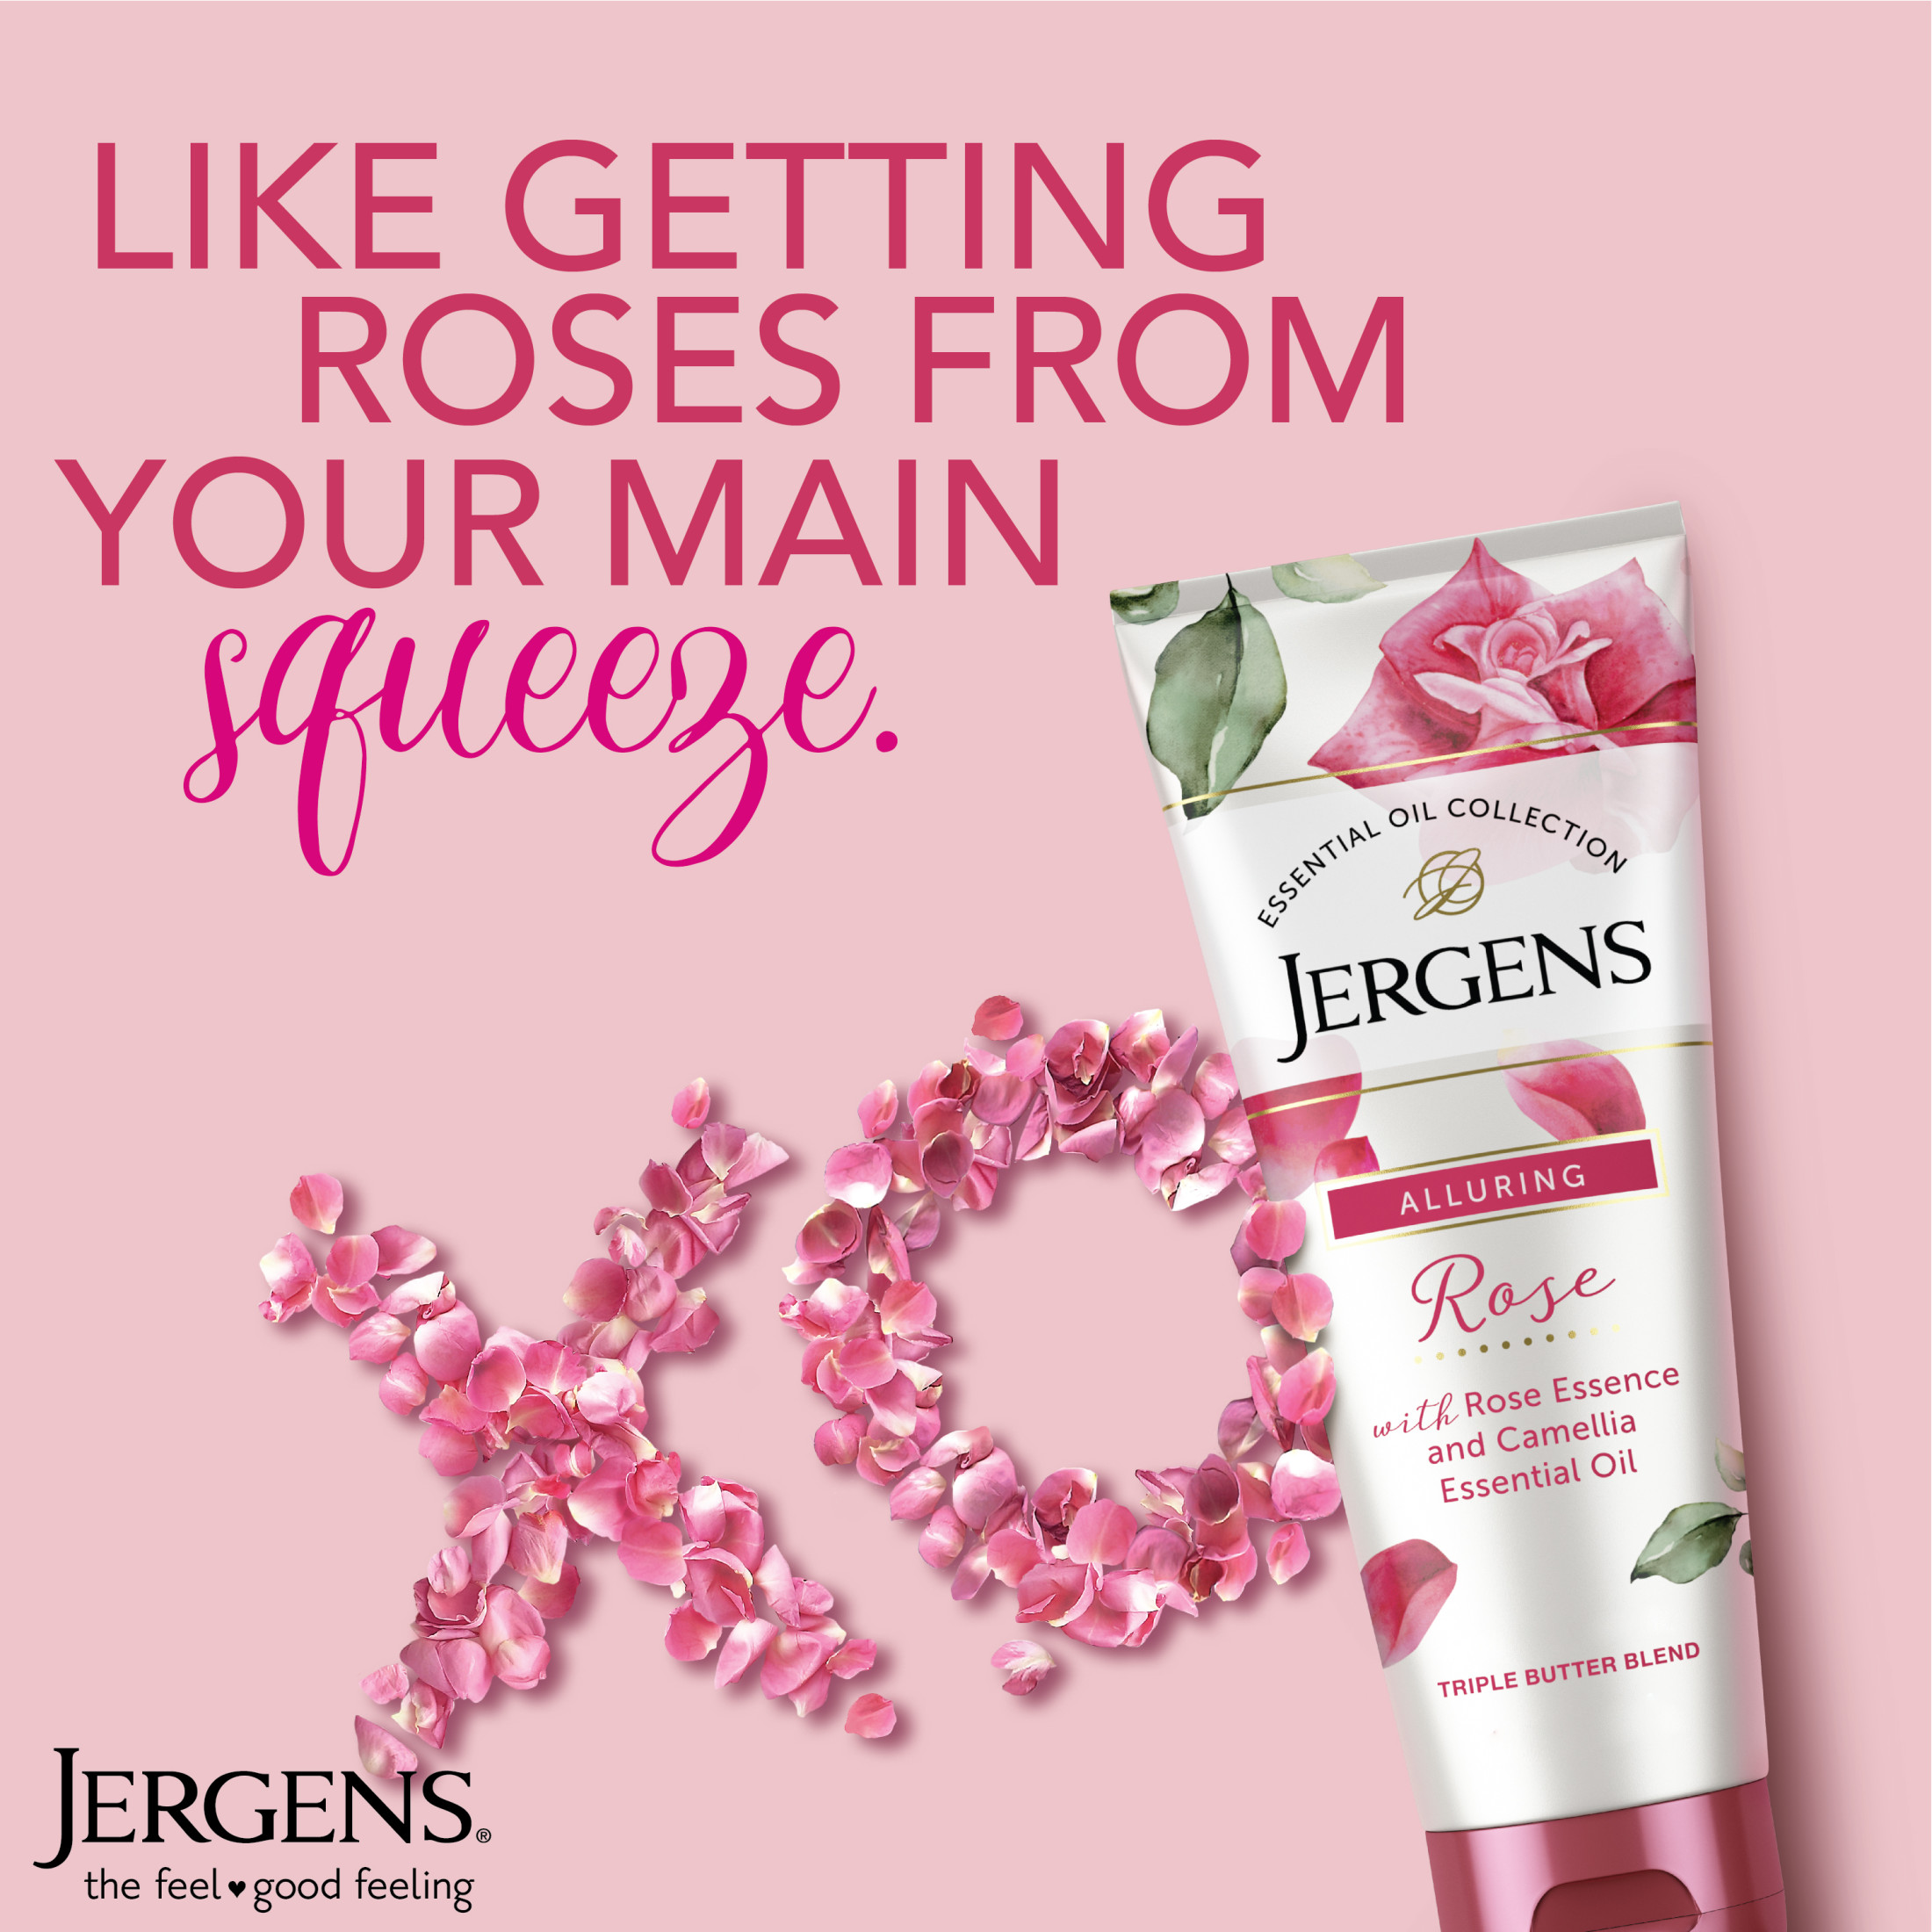 Jergens Hand and Body Lotion, Rose Body Butter Lotion, with Camellia Essential Oil, 7 Oz - image 3 of 10